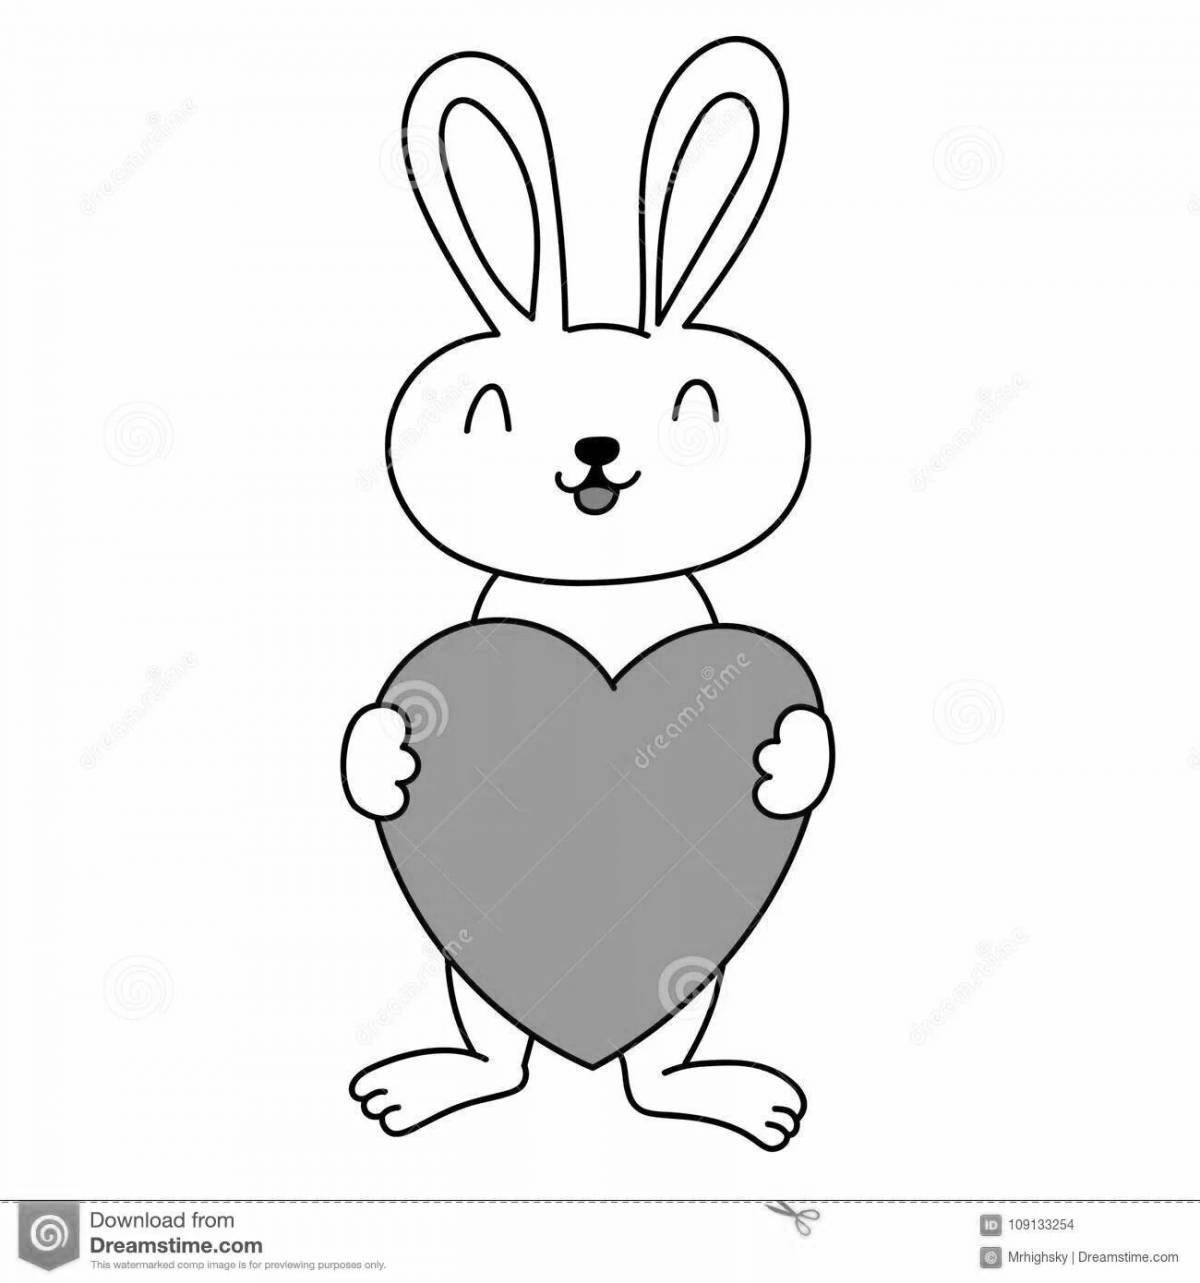 Coloring page adorable rabbit with a heart